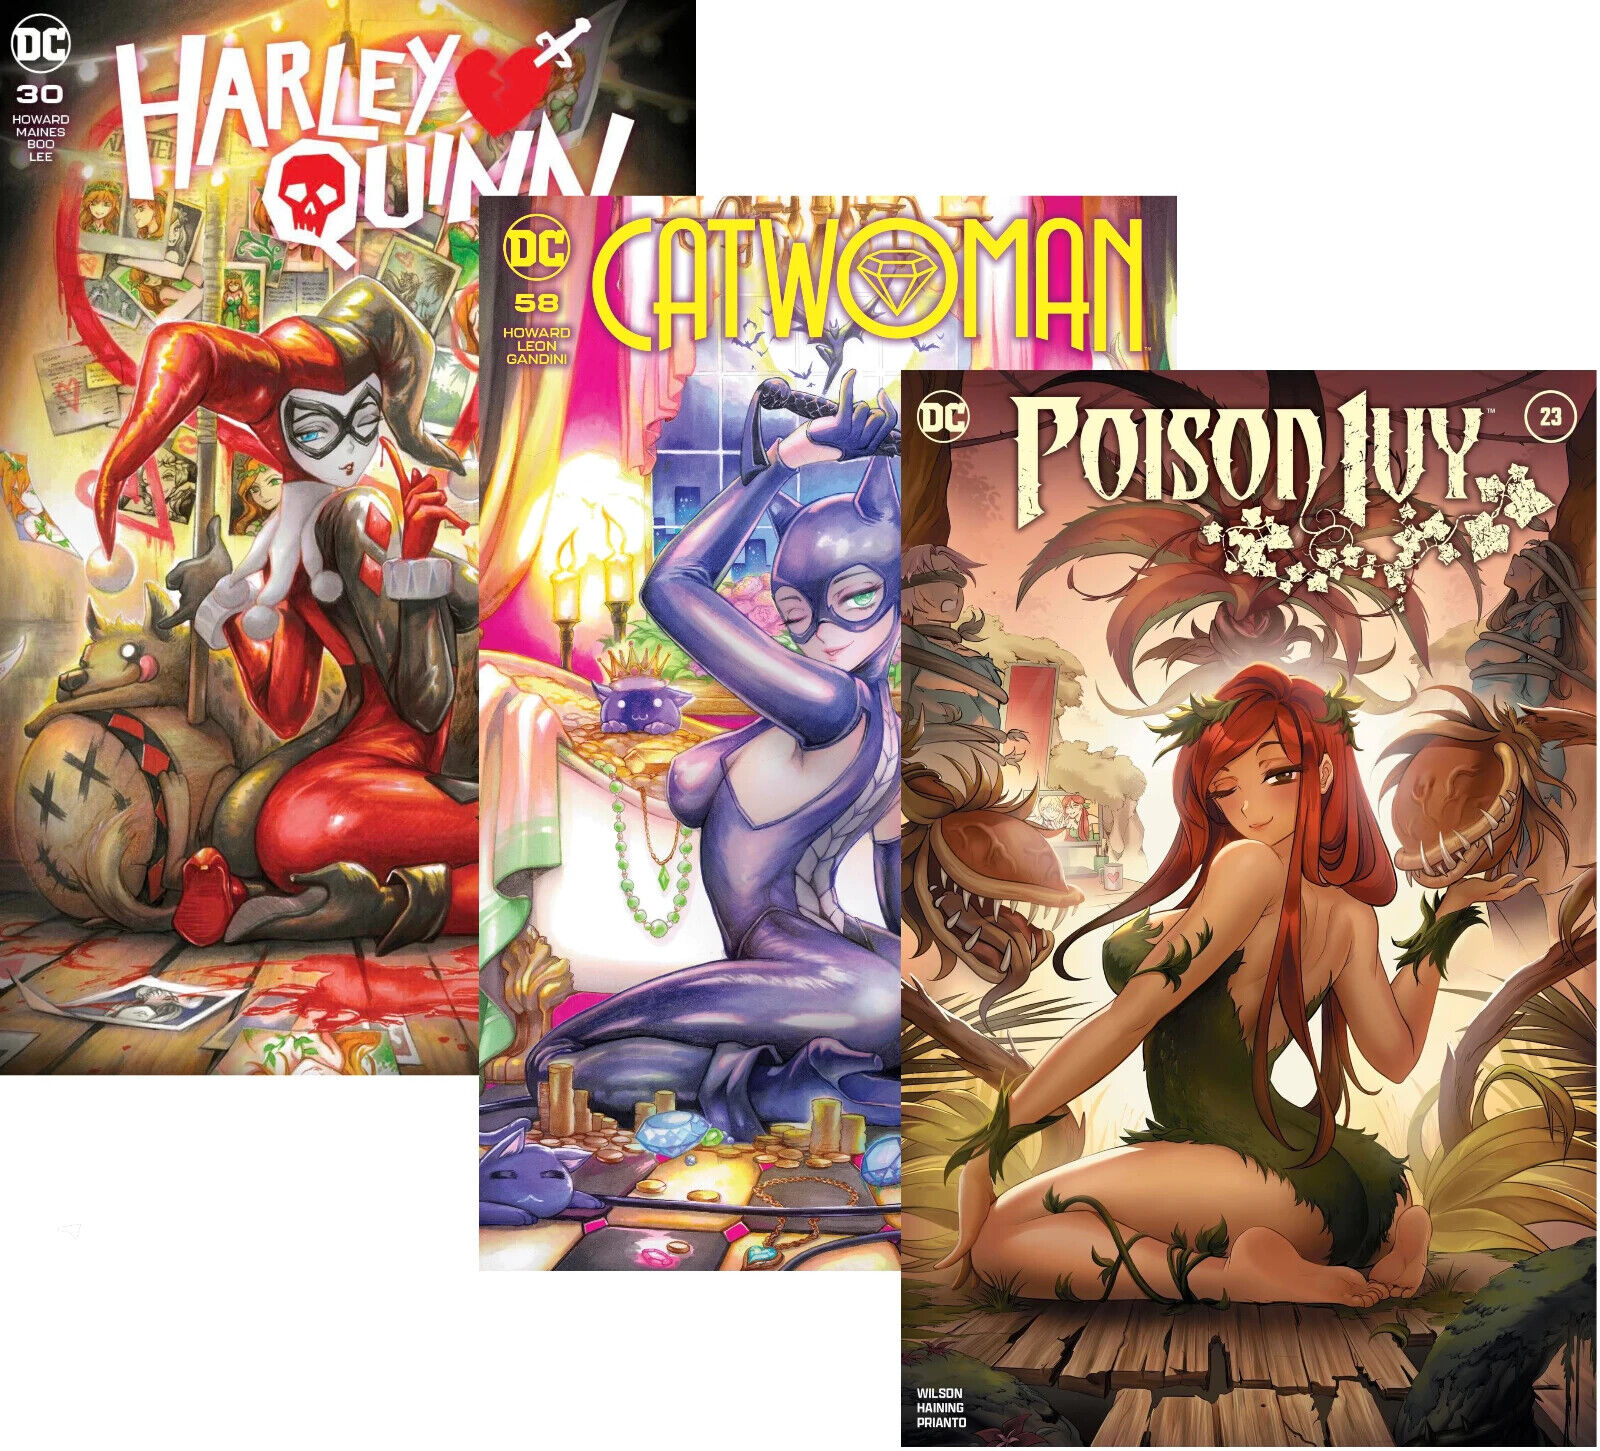 POISON IVY #23, CATWOMAN #58, HARLEY QUINN #30 (RACHTA LIN EXCLUSIVE SET)